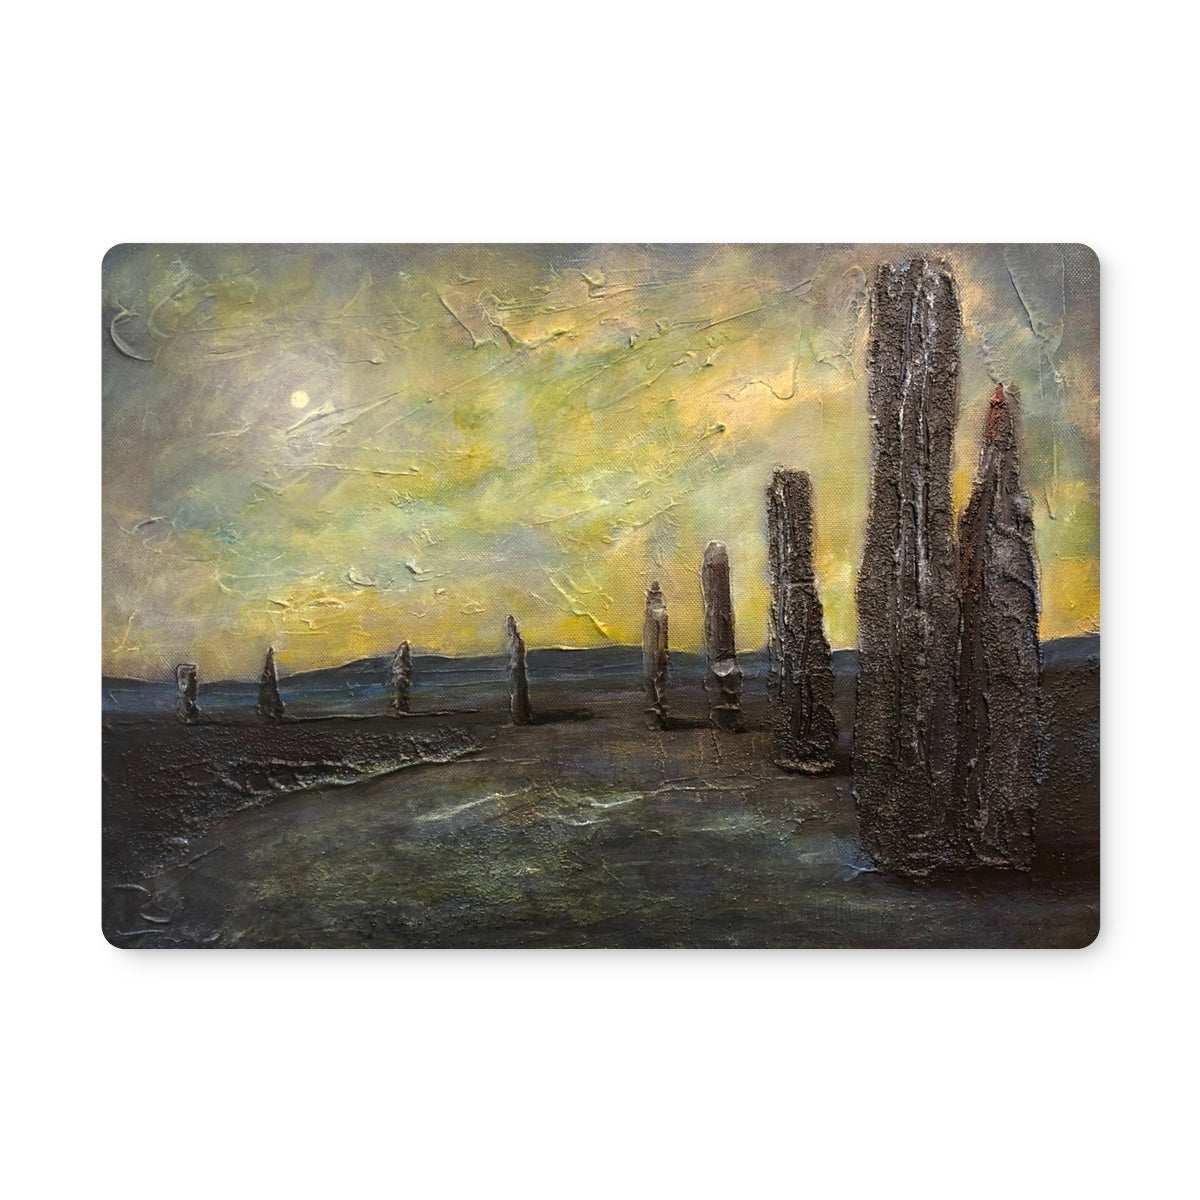 An Ethereal Ring Of Brodgar Art Gifts Placemat-Placemats-Orkney Art Gallery-2 Placemats-Paintings, Prints, Homeware, Art Gifts From Scotland By Scottish Artist Kevin Hunter